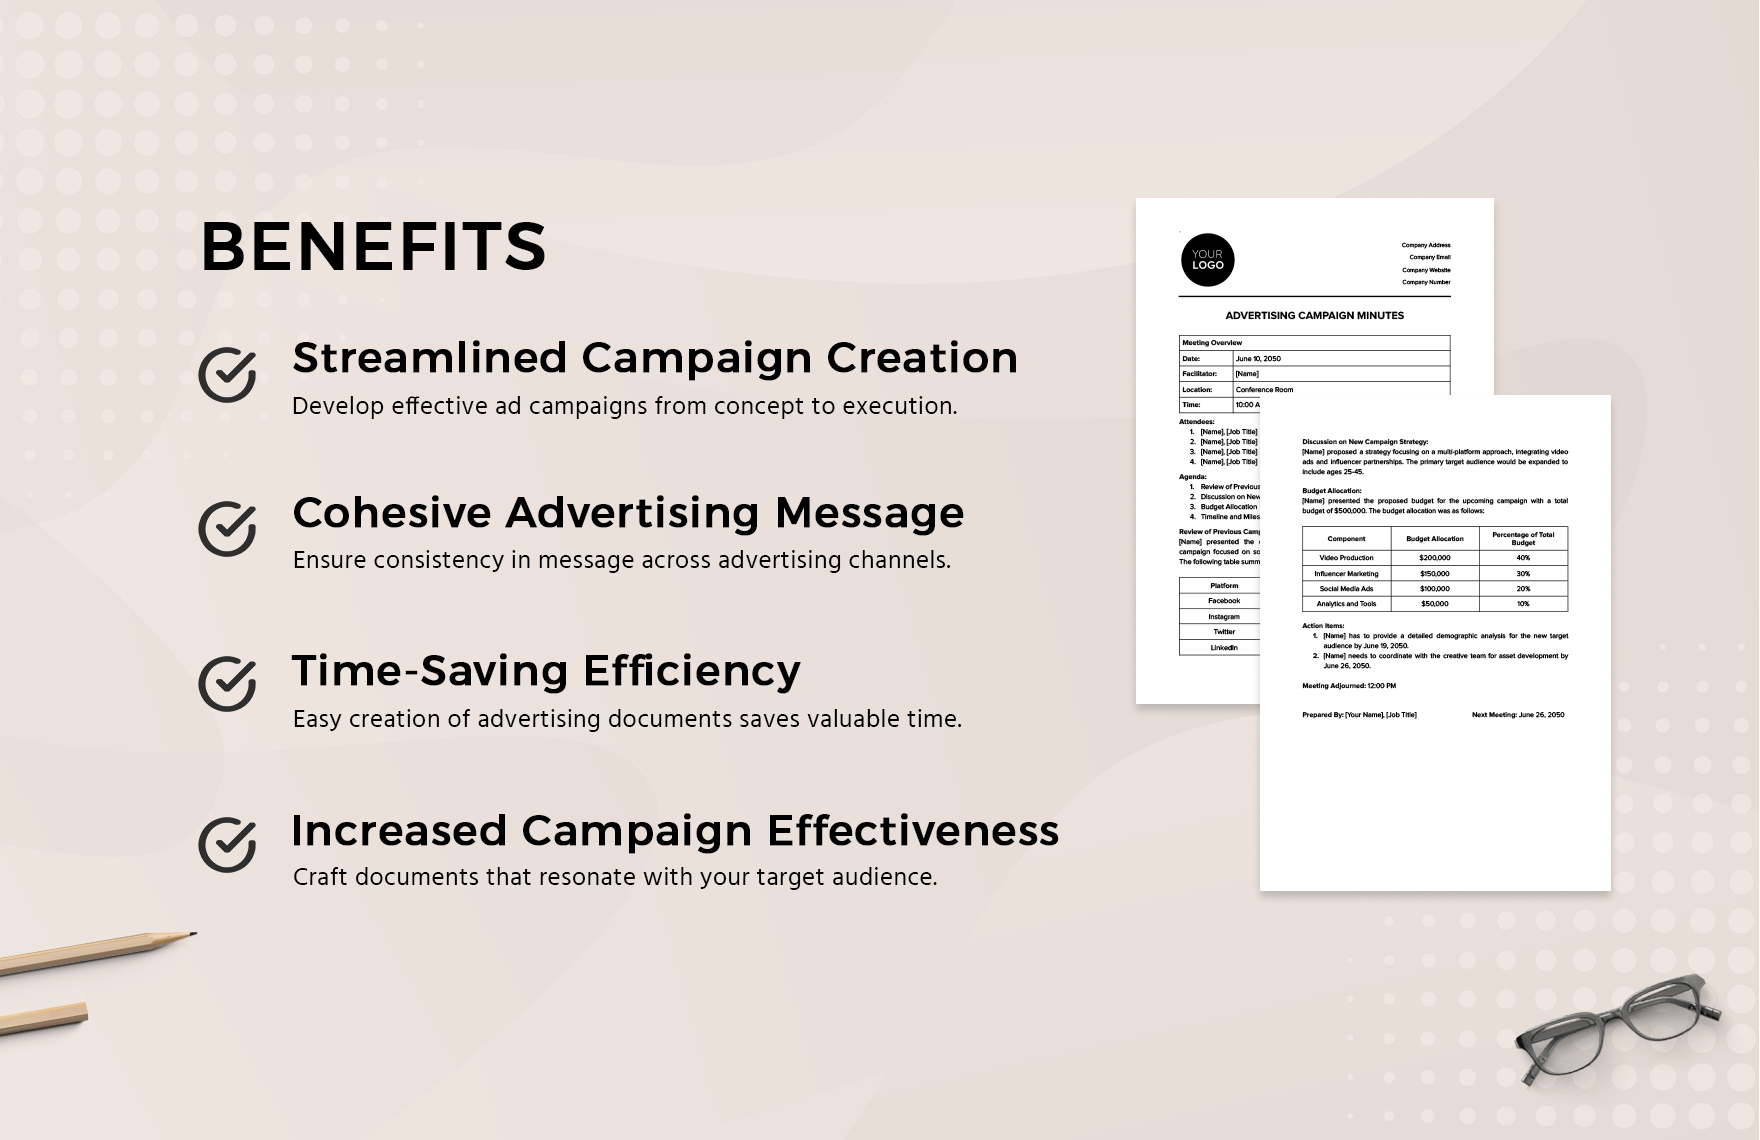 Advertising Campaign Minutes Template